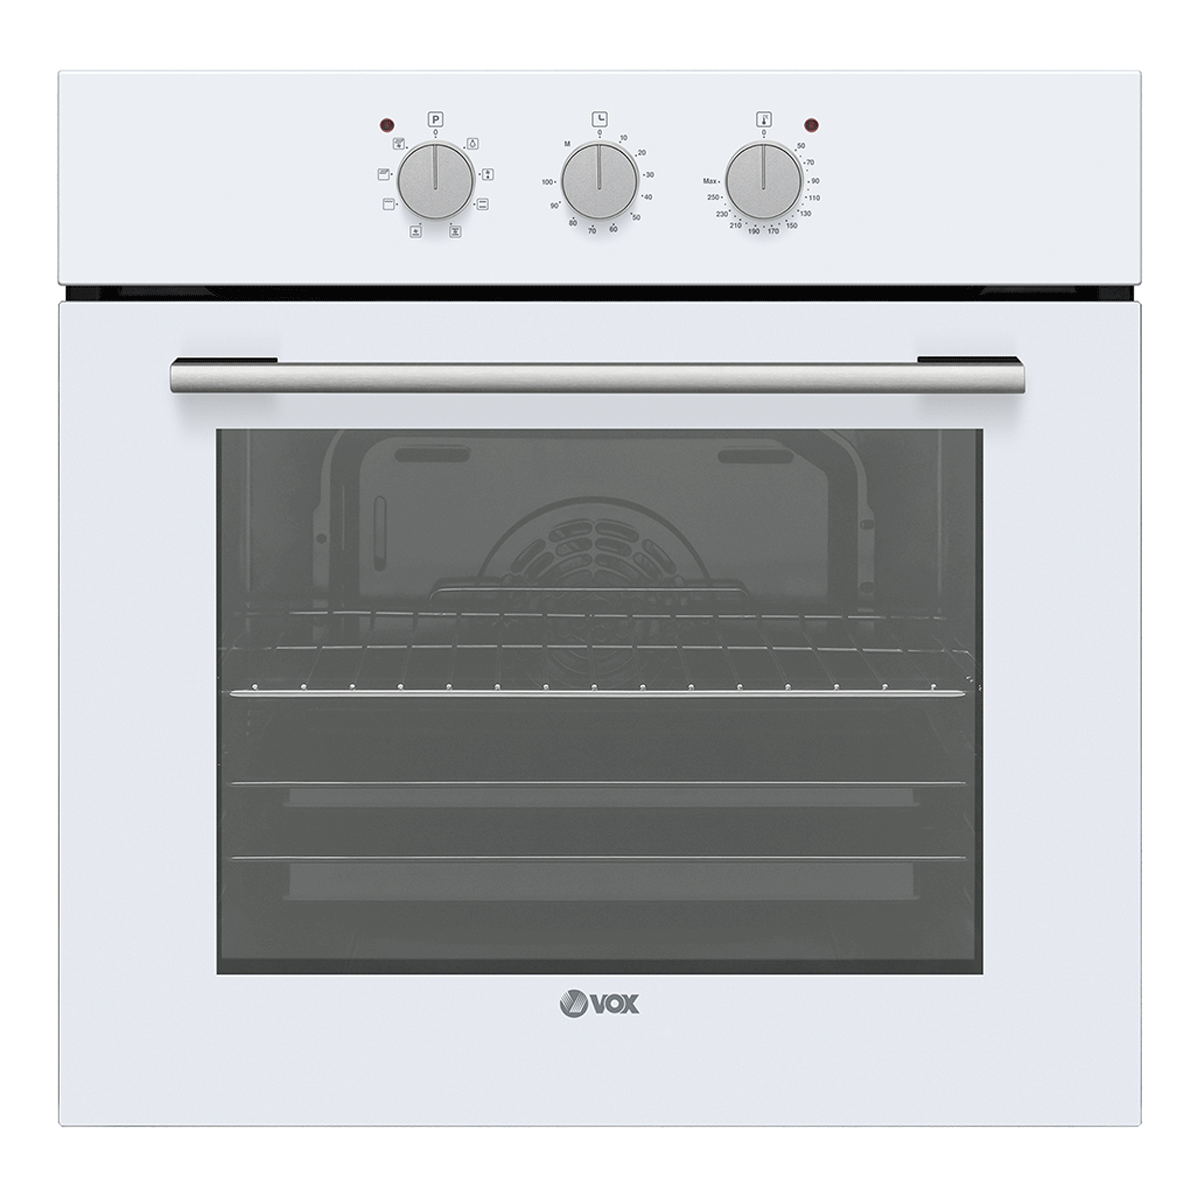 Built-in oven EBM 2110 W 